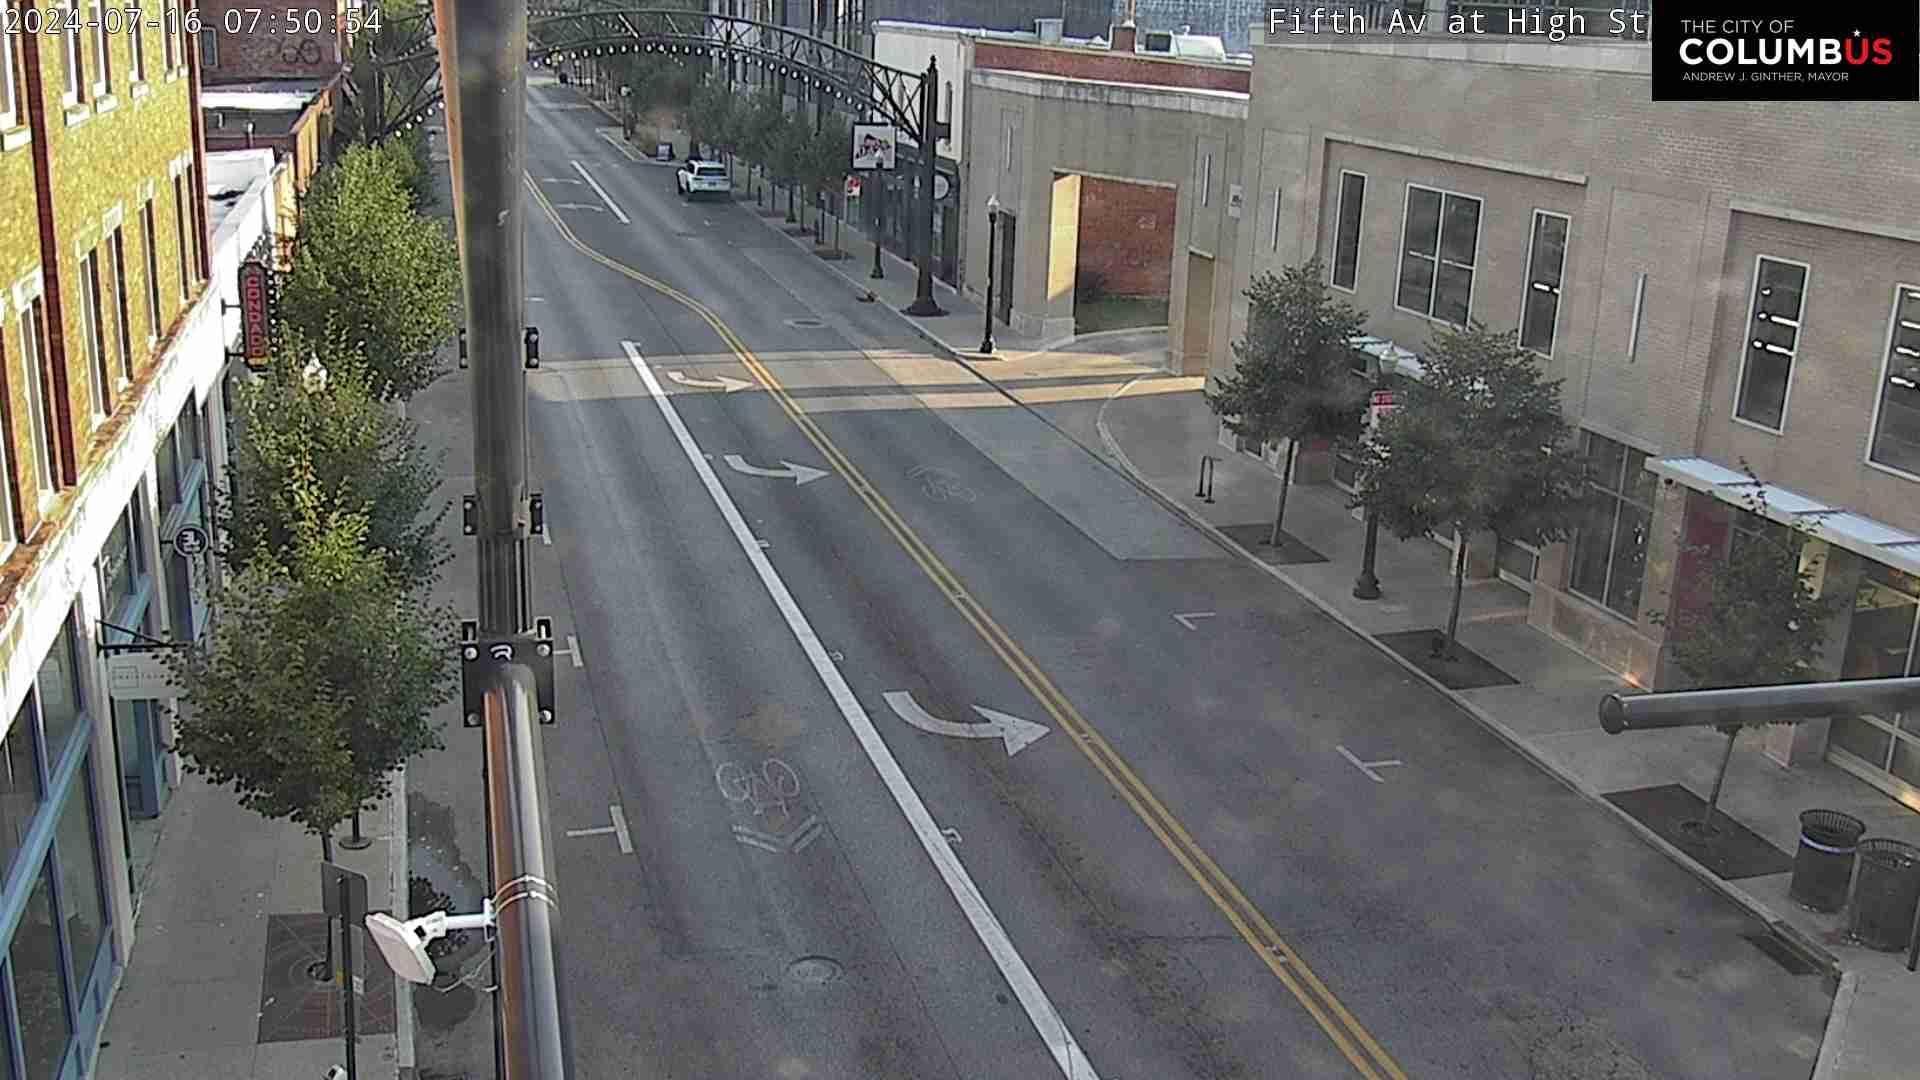 Traffic Cam Dennison Place: City of Columbus) High St at Fifth Ave